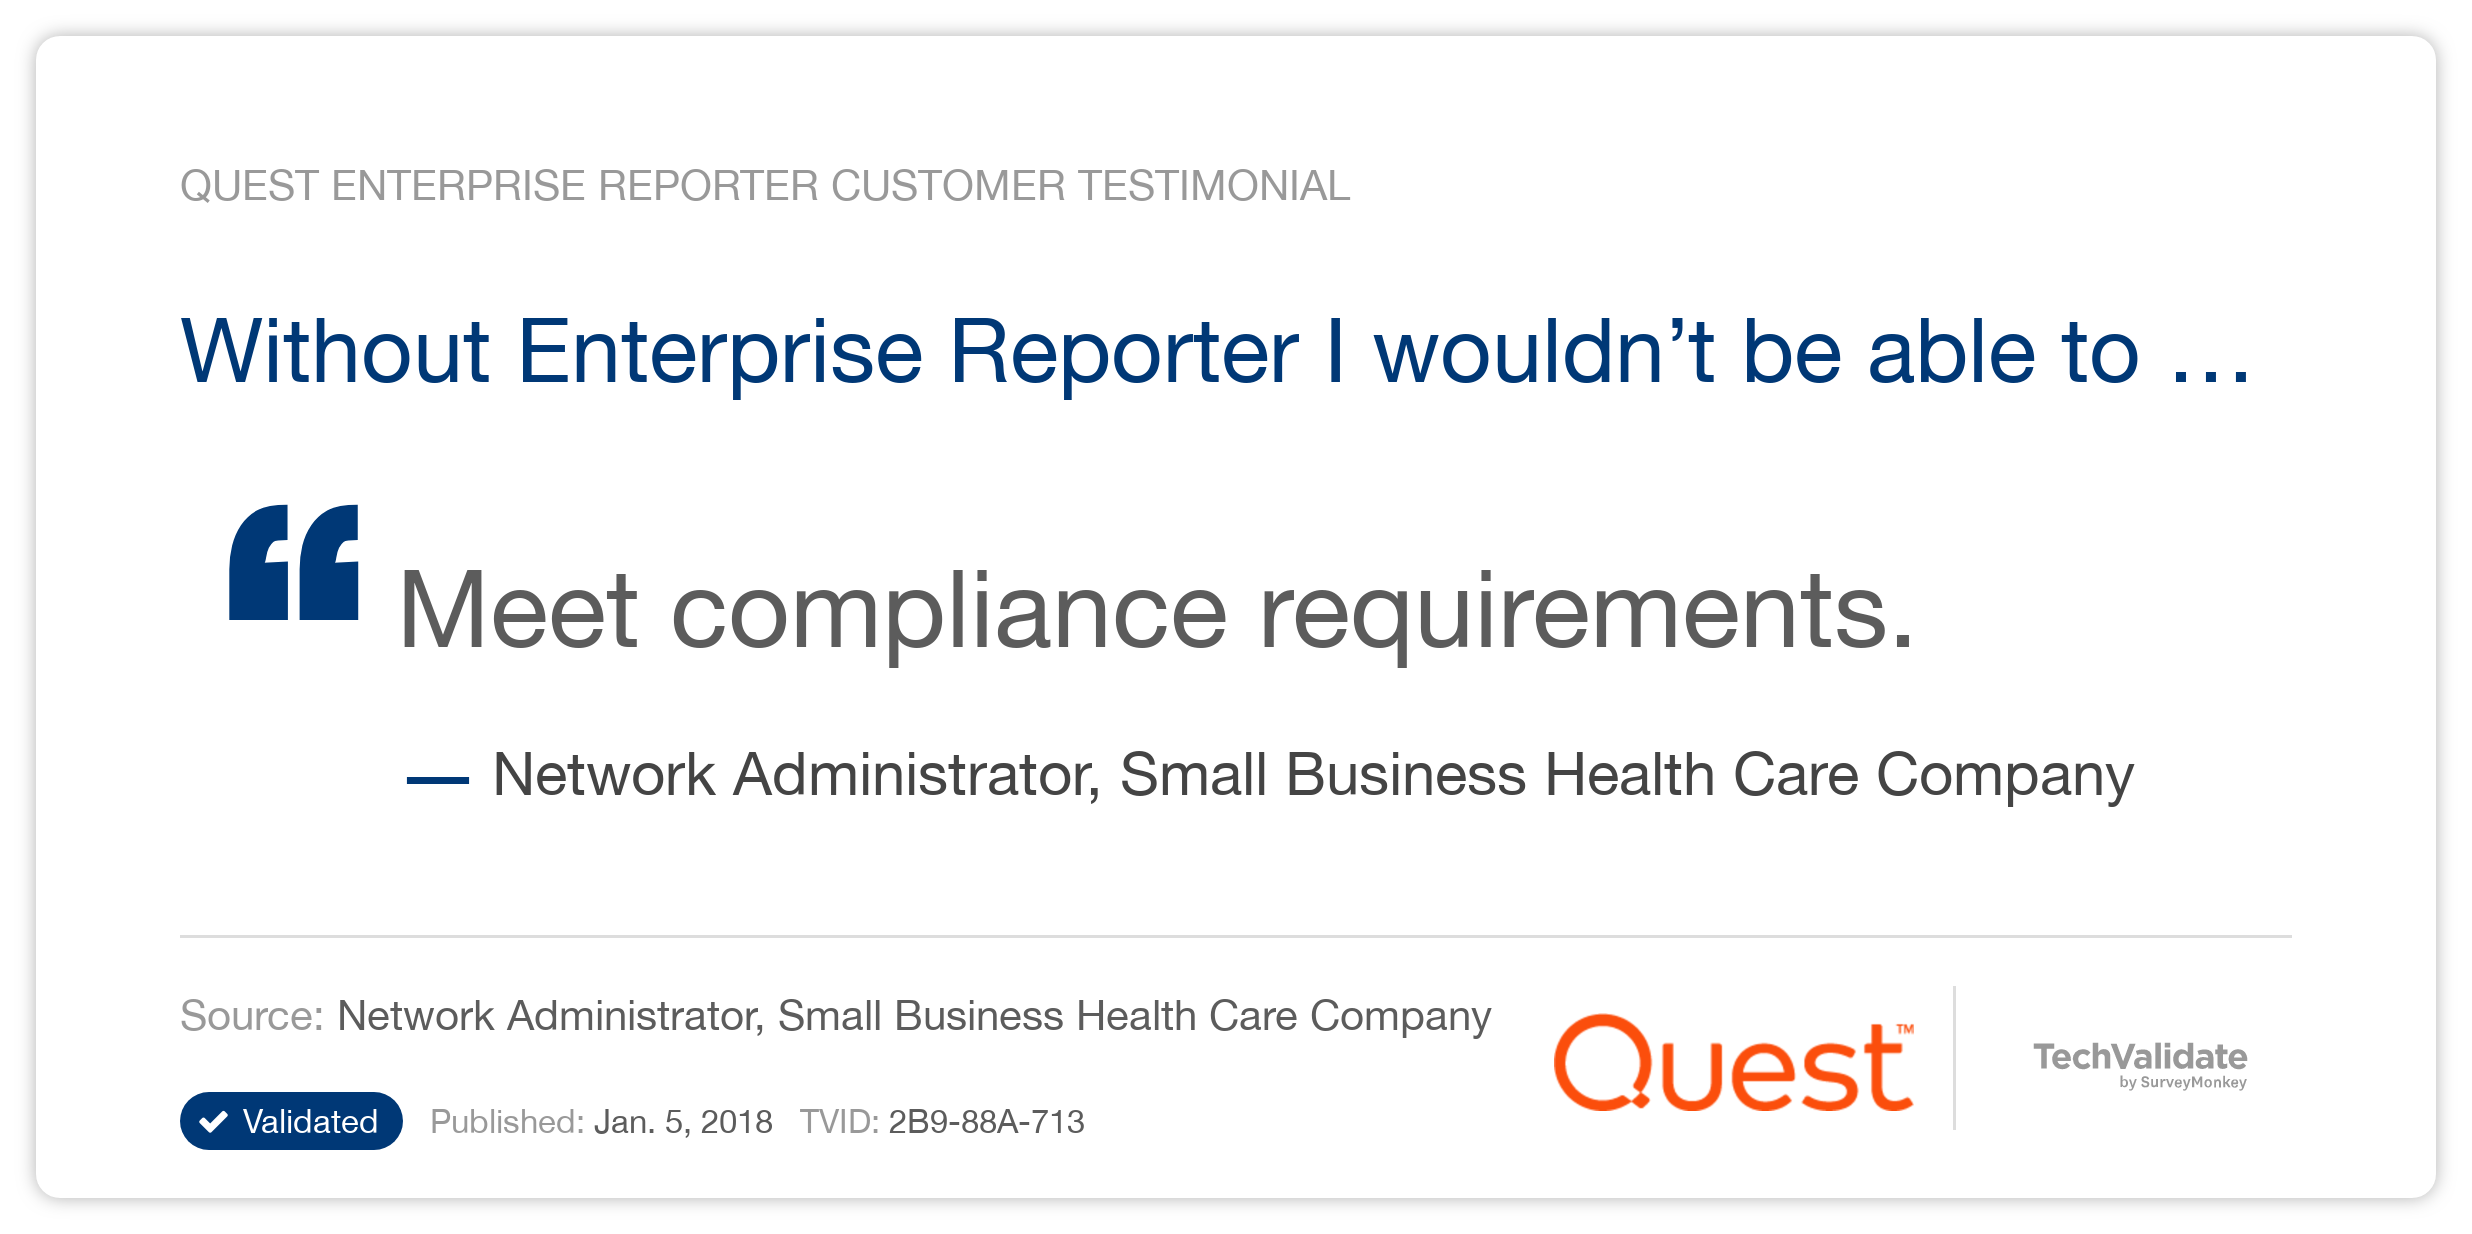 Without Enterprise Reporter I wouldn’t be able to …